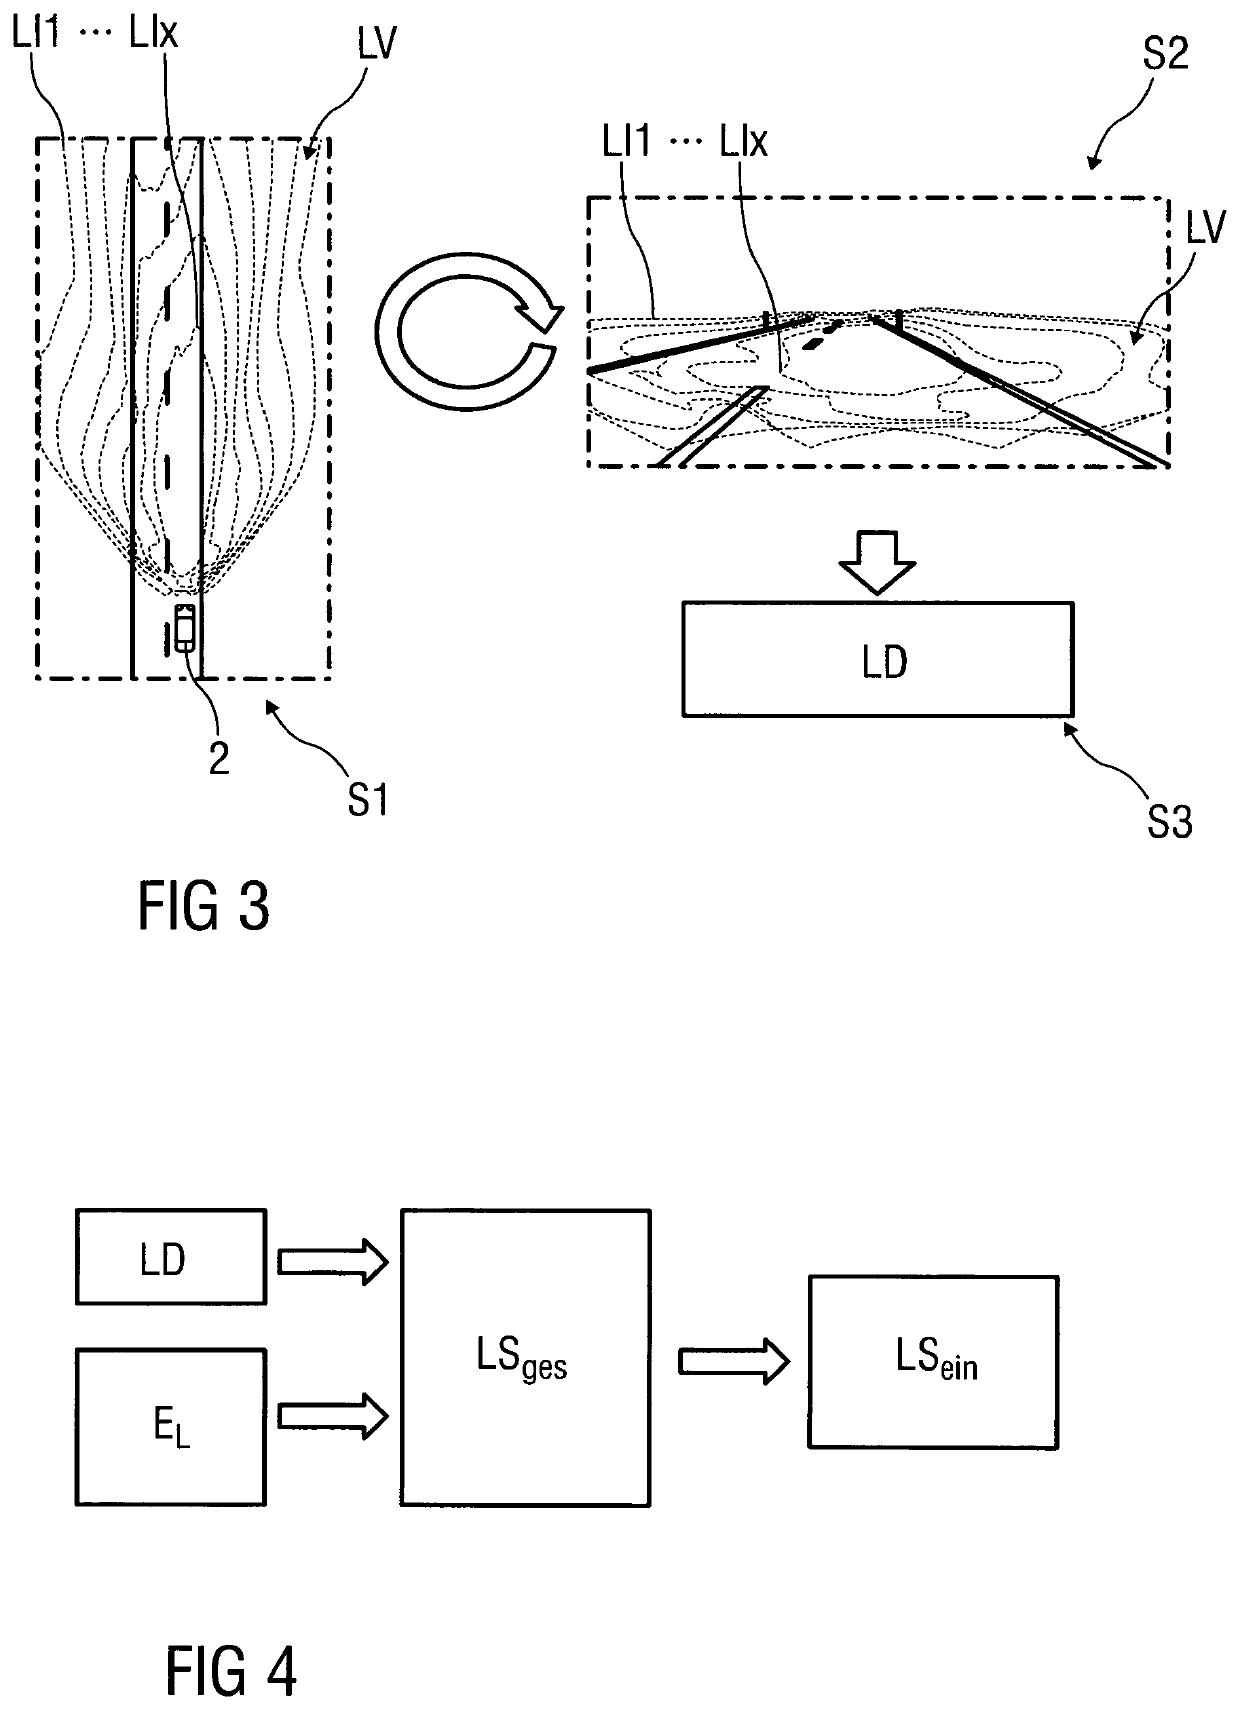 Method for determining control parameters for light sources of a vehicle headlamp